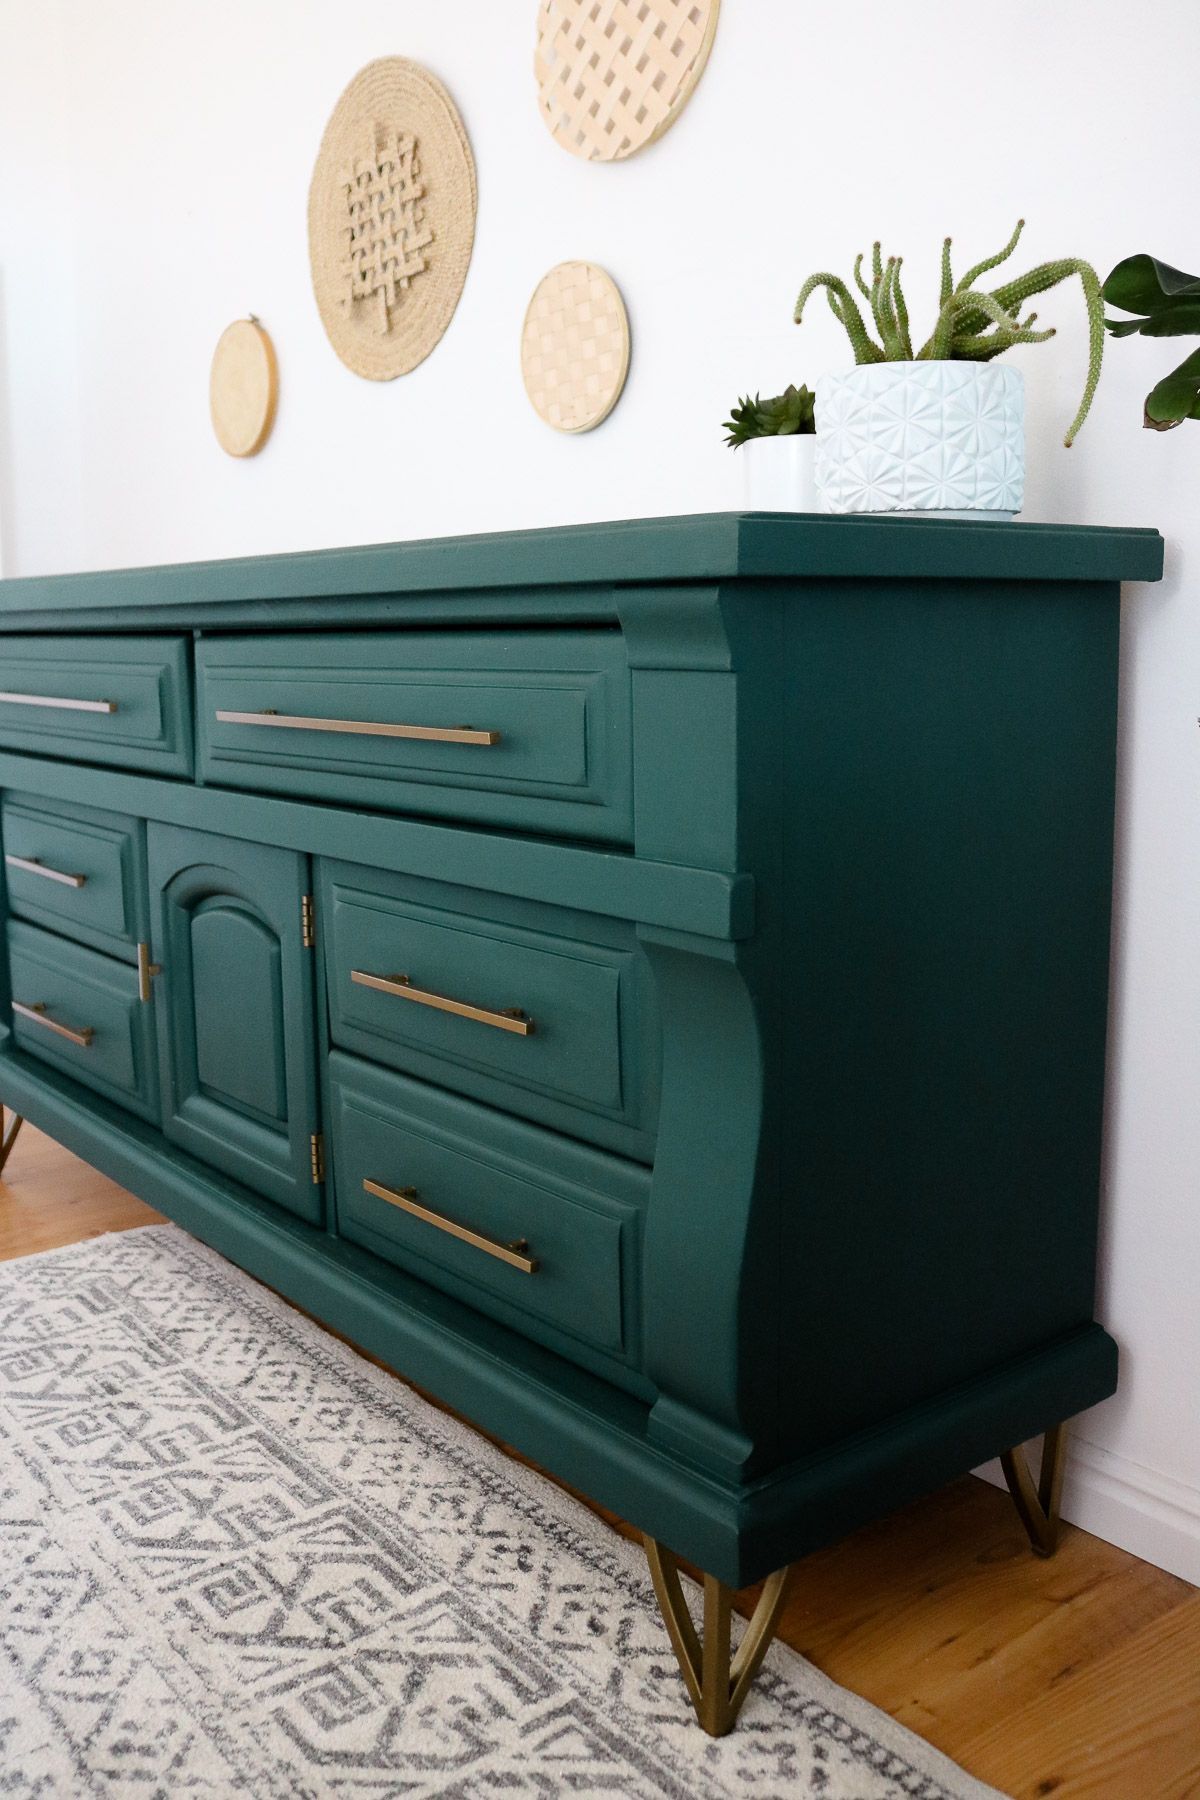 DIY Dresser Makeover -   16 diy projects For Bedroom how to paint ideas